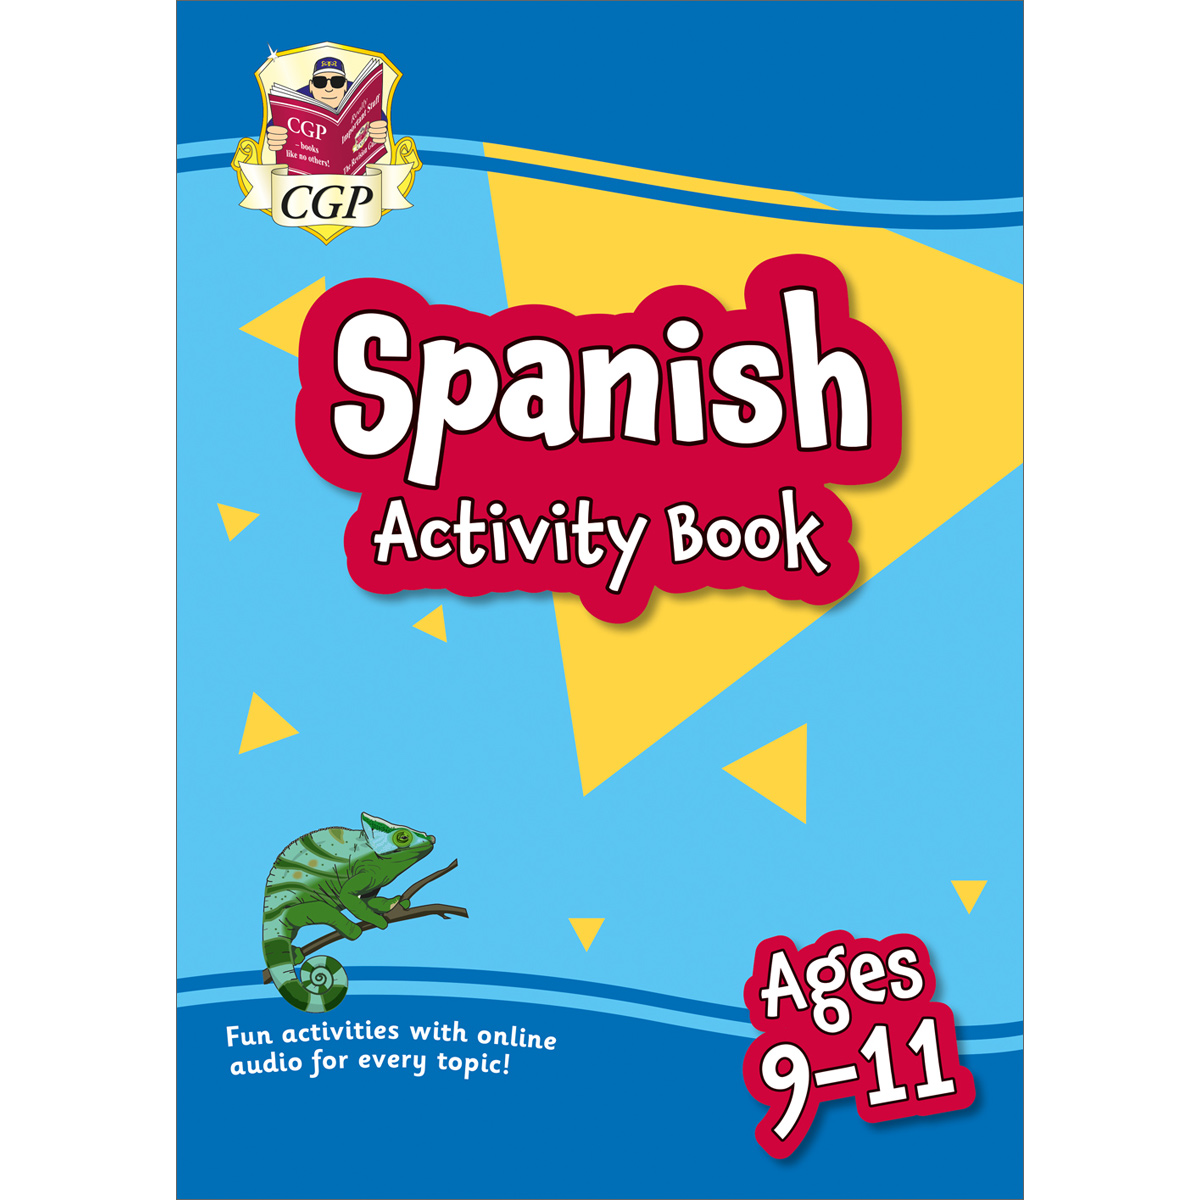 CGP Spanish Activity Book: Ages 9-11